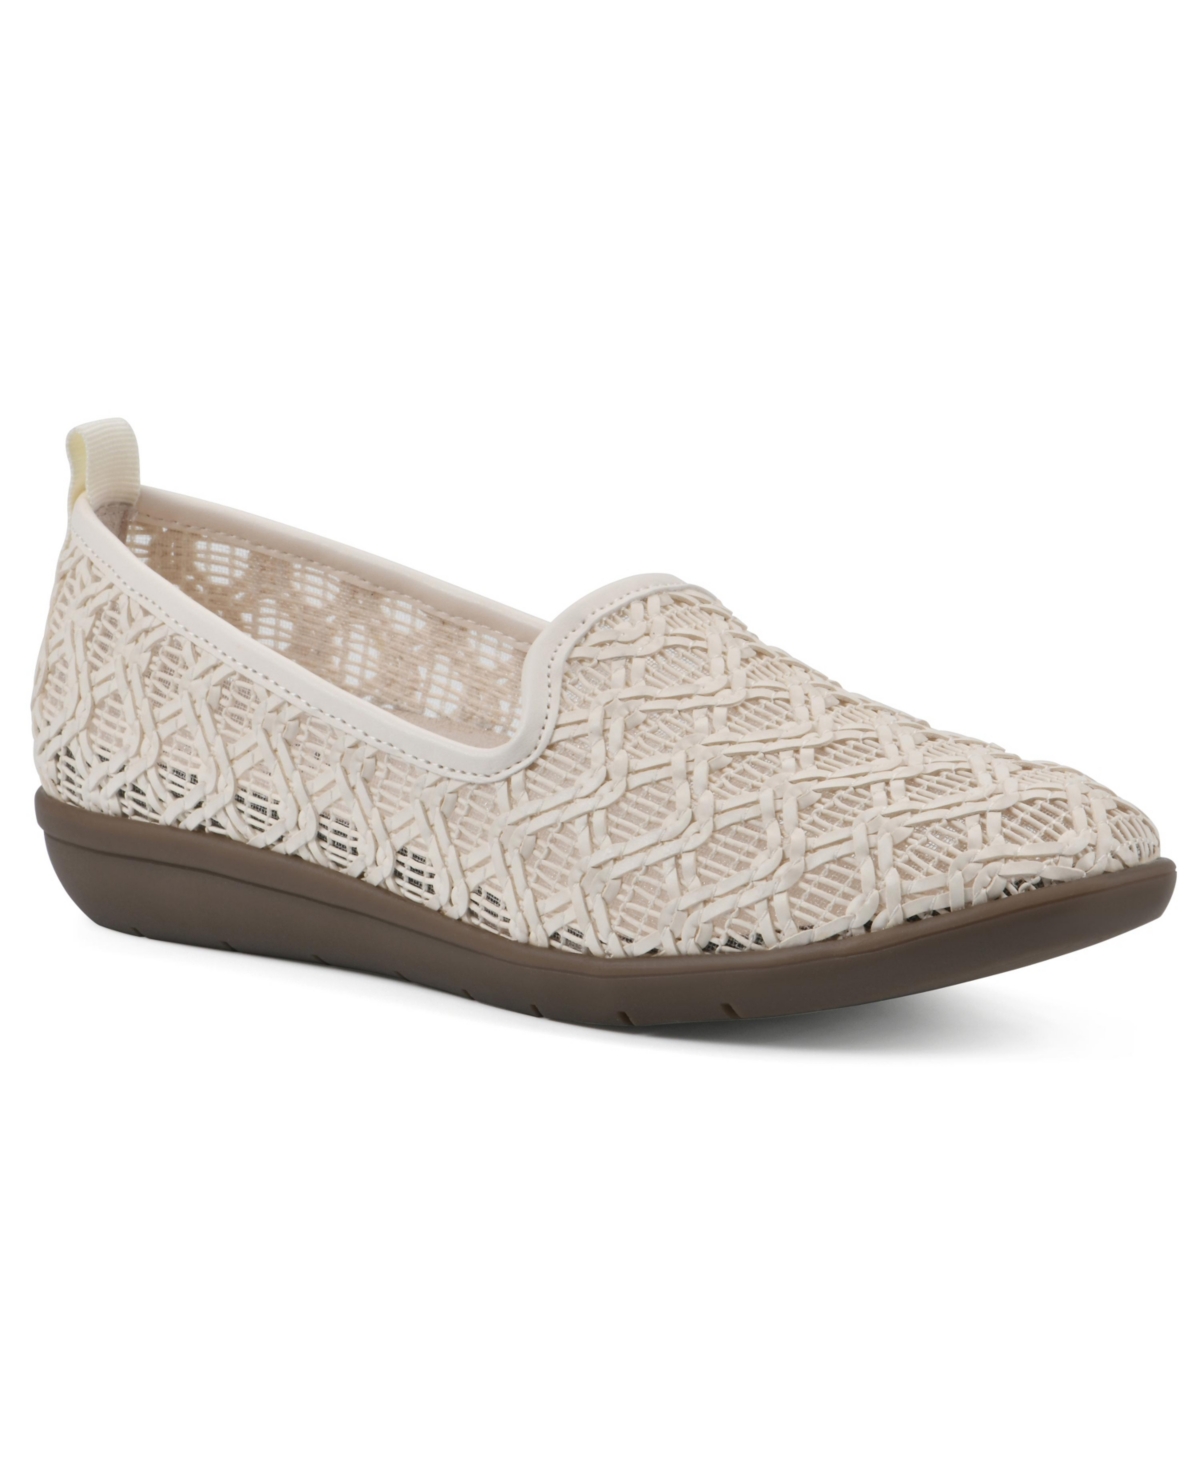 Women's Twisty Moc Loafer - Light Taupe Fabric